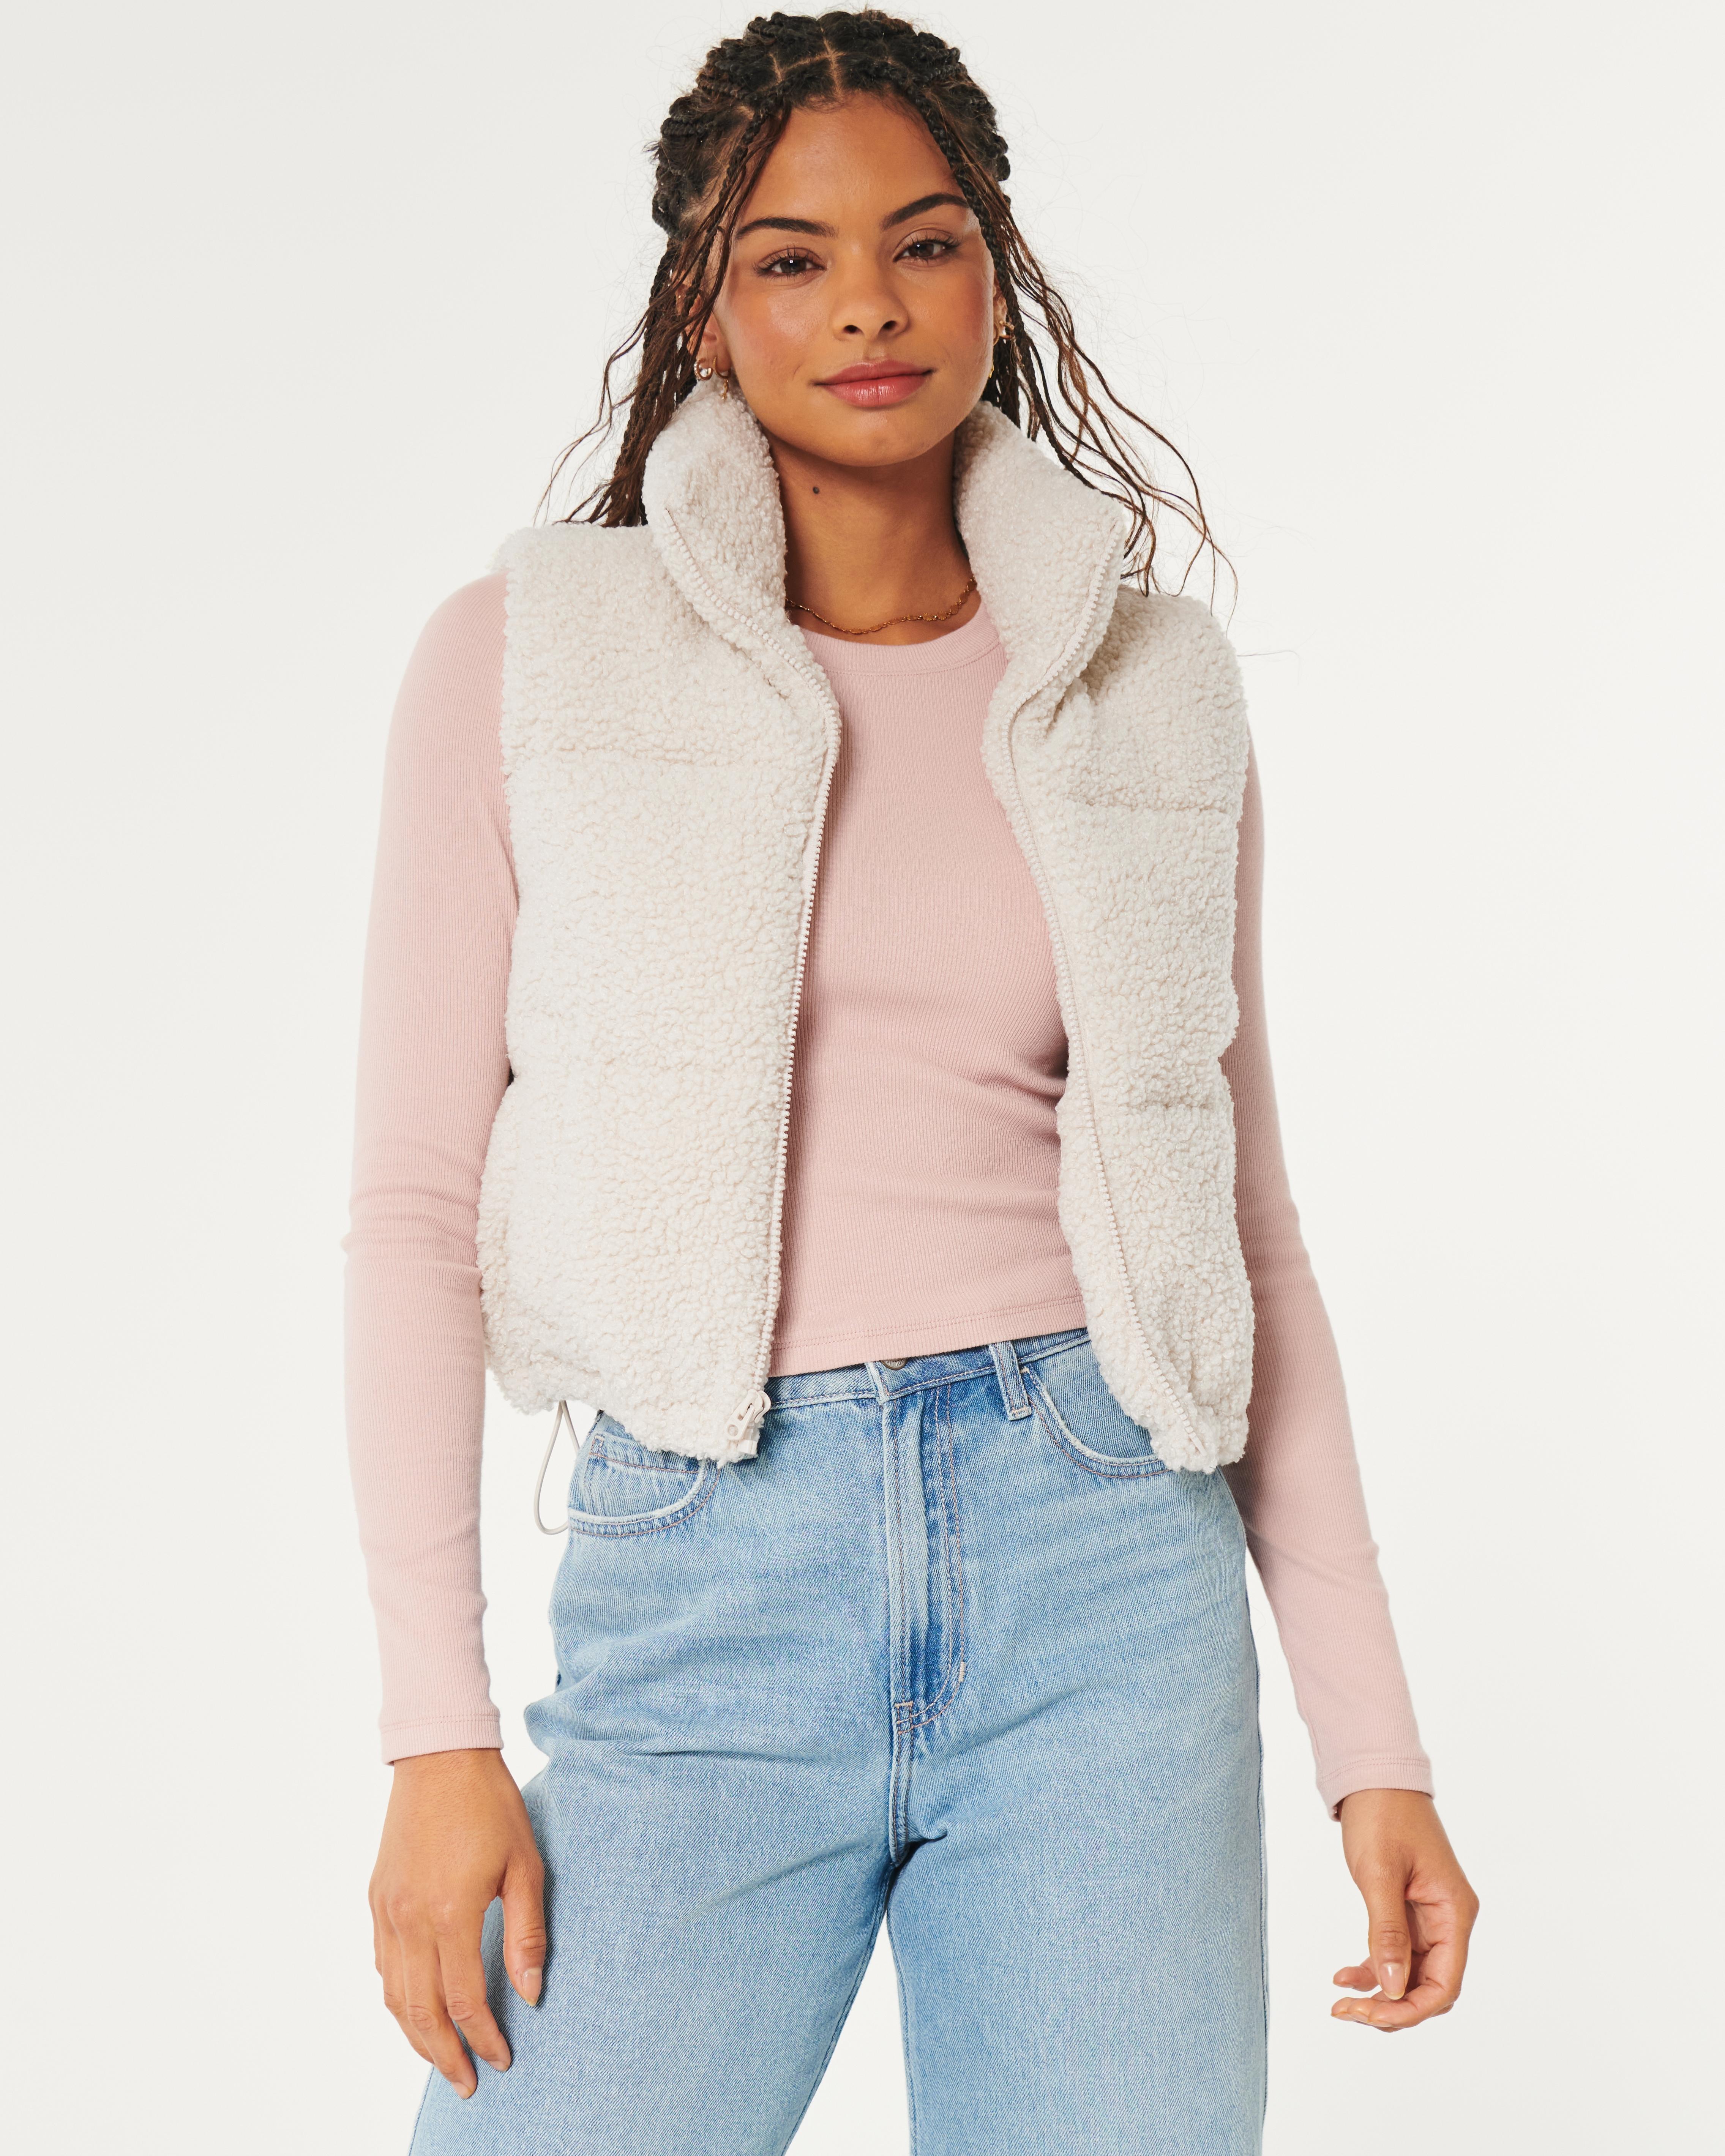 Hollister Gilly Hicks Sherpa Puffer Jacket in Natural